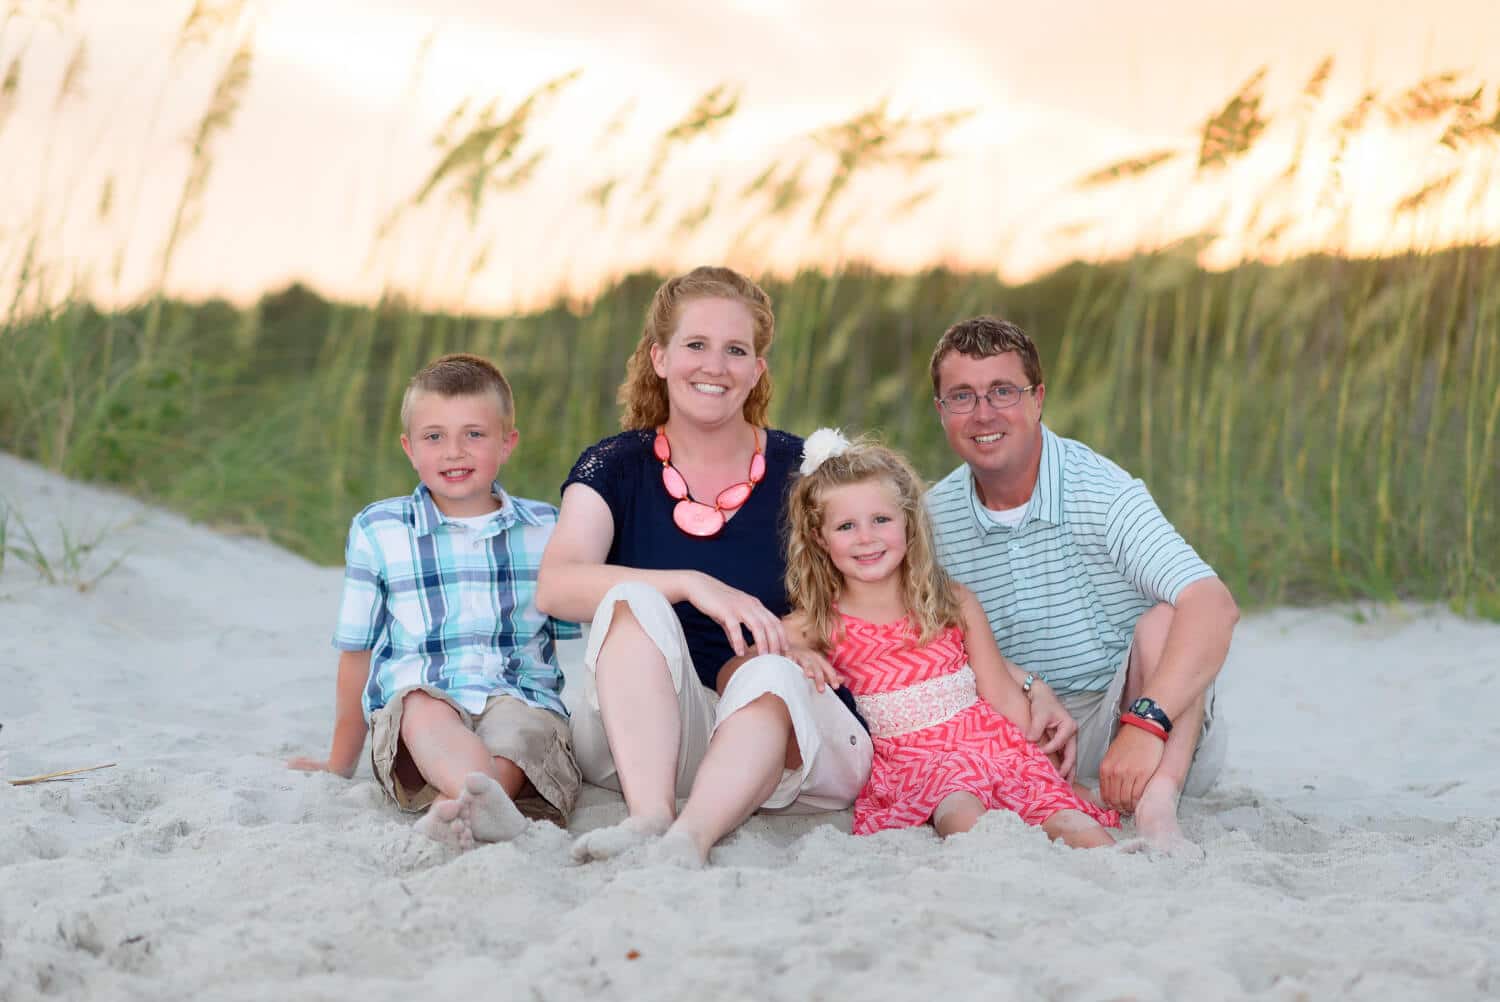 Family of 4 in front of a beautiful sunset by the sea oats